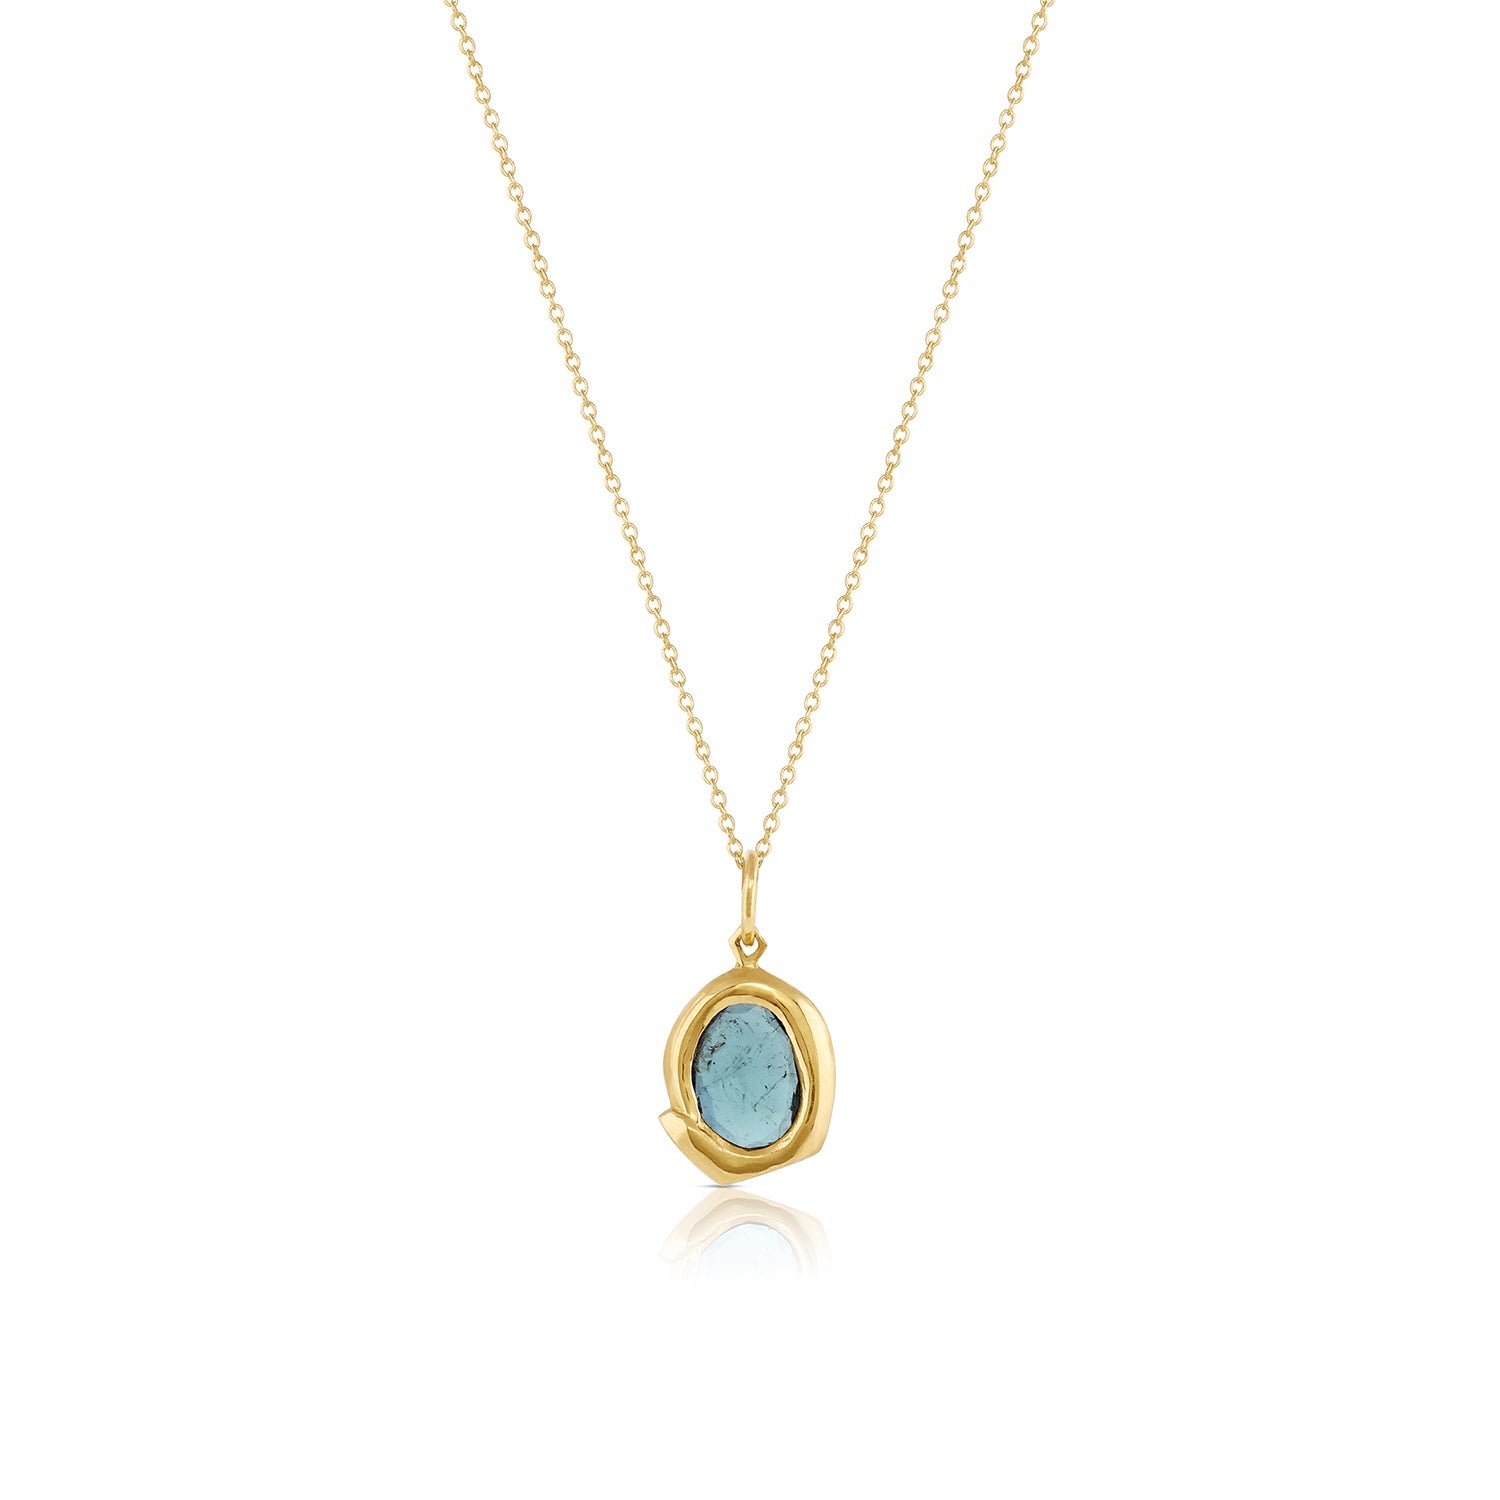 Ouroboros blue tourmaline necklace | Fine Ouroboros Jewelry Collection | 12th HOUSE | Mystical Fine Jewelry | Talisman | Moon phase Rings | Celestial Zodiac | Ouroboros talisman necklace, blue rose cut tourmaline necklace, Snake pendant, Eternity Symbol